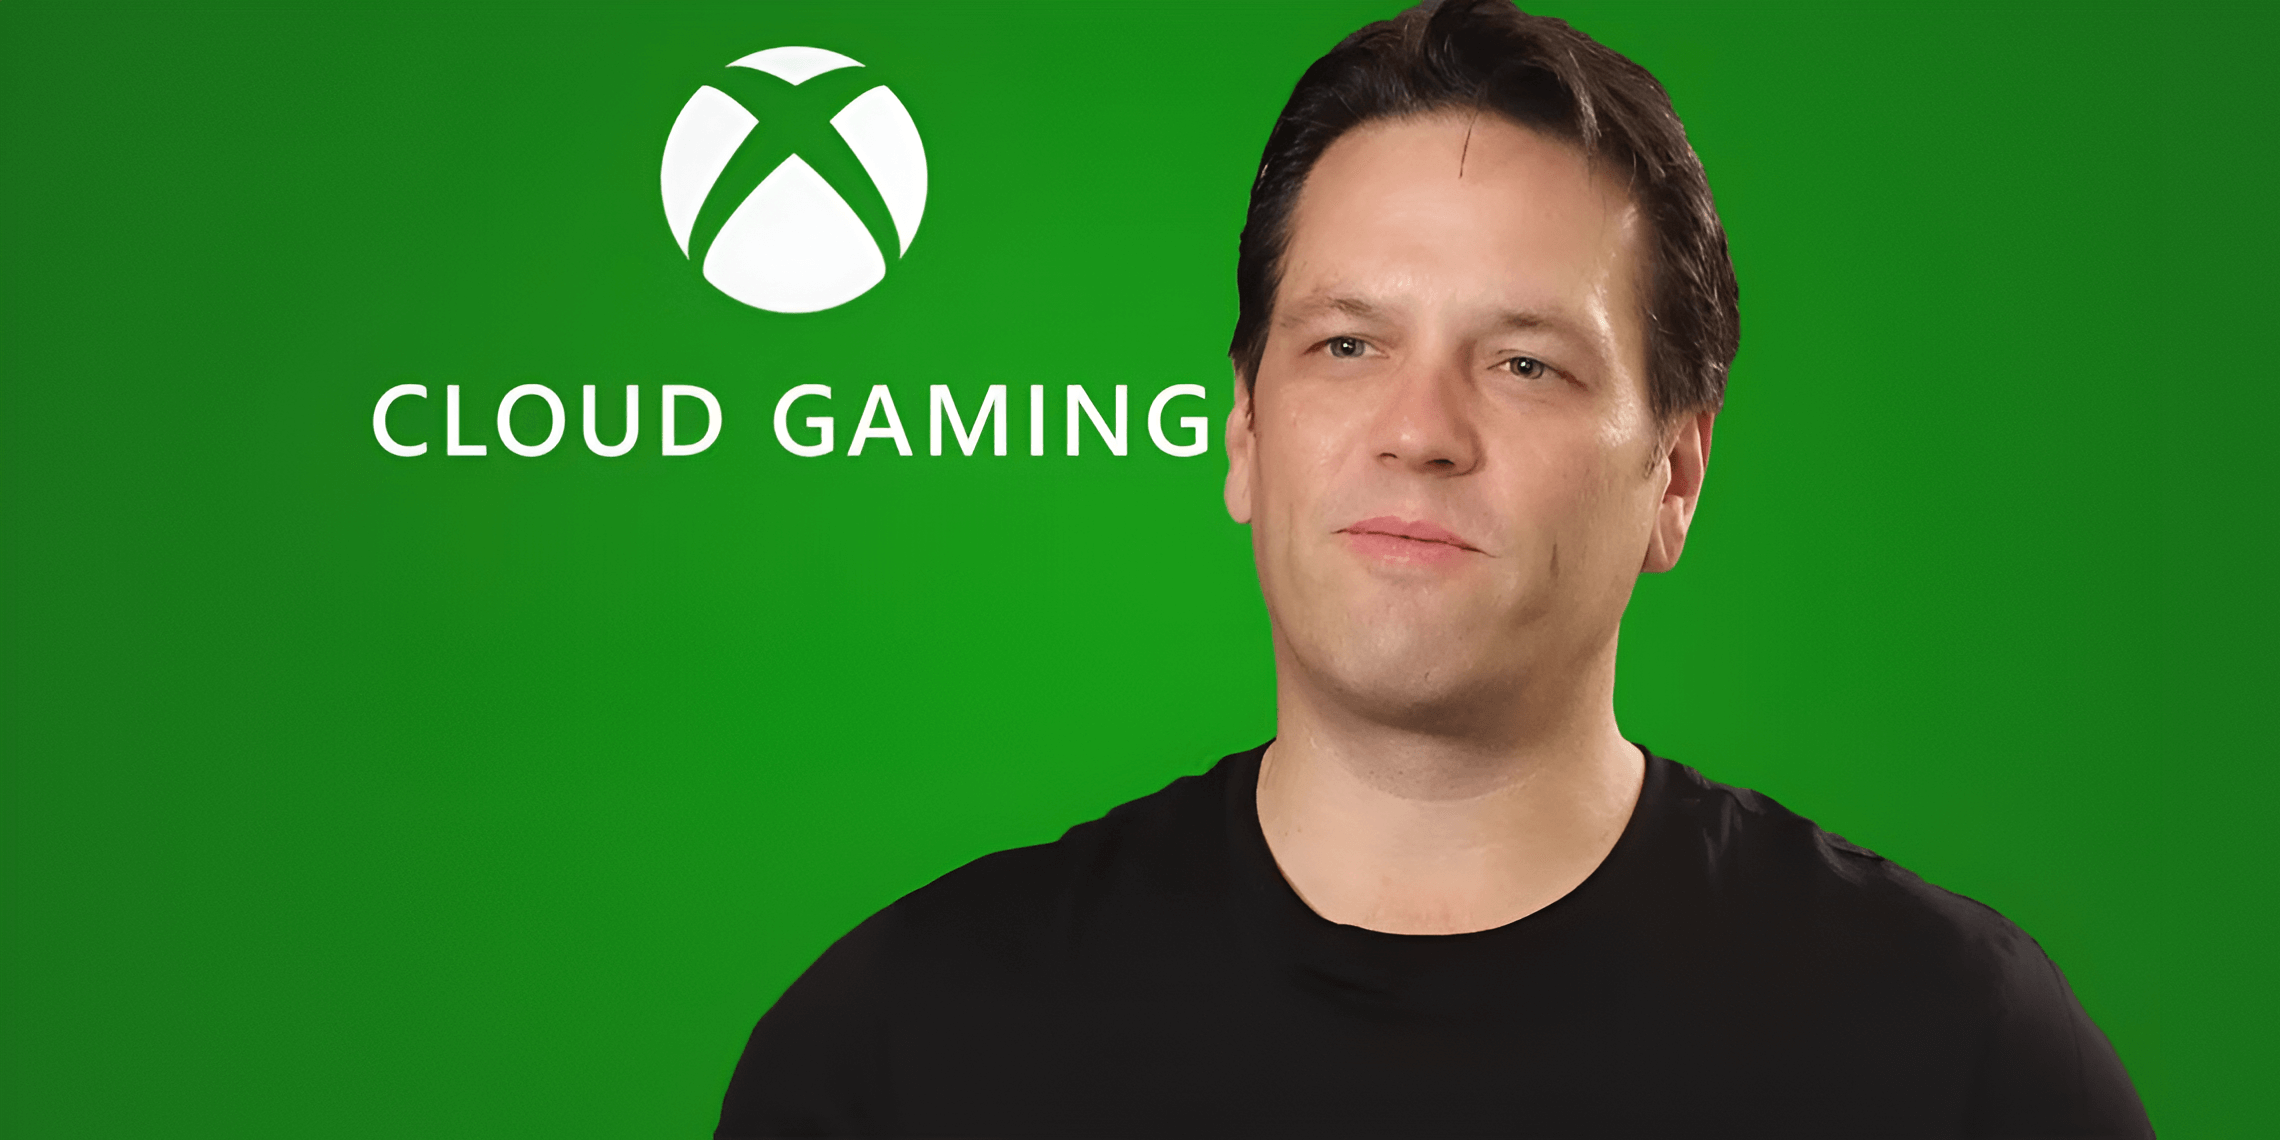 phil-spencer-in-front-of-xbox-cloud-gaming-logo-on-dark-green-background-composite (1)